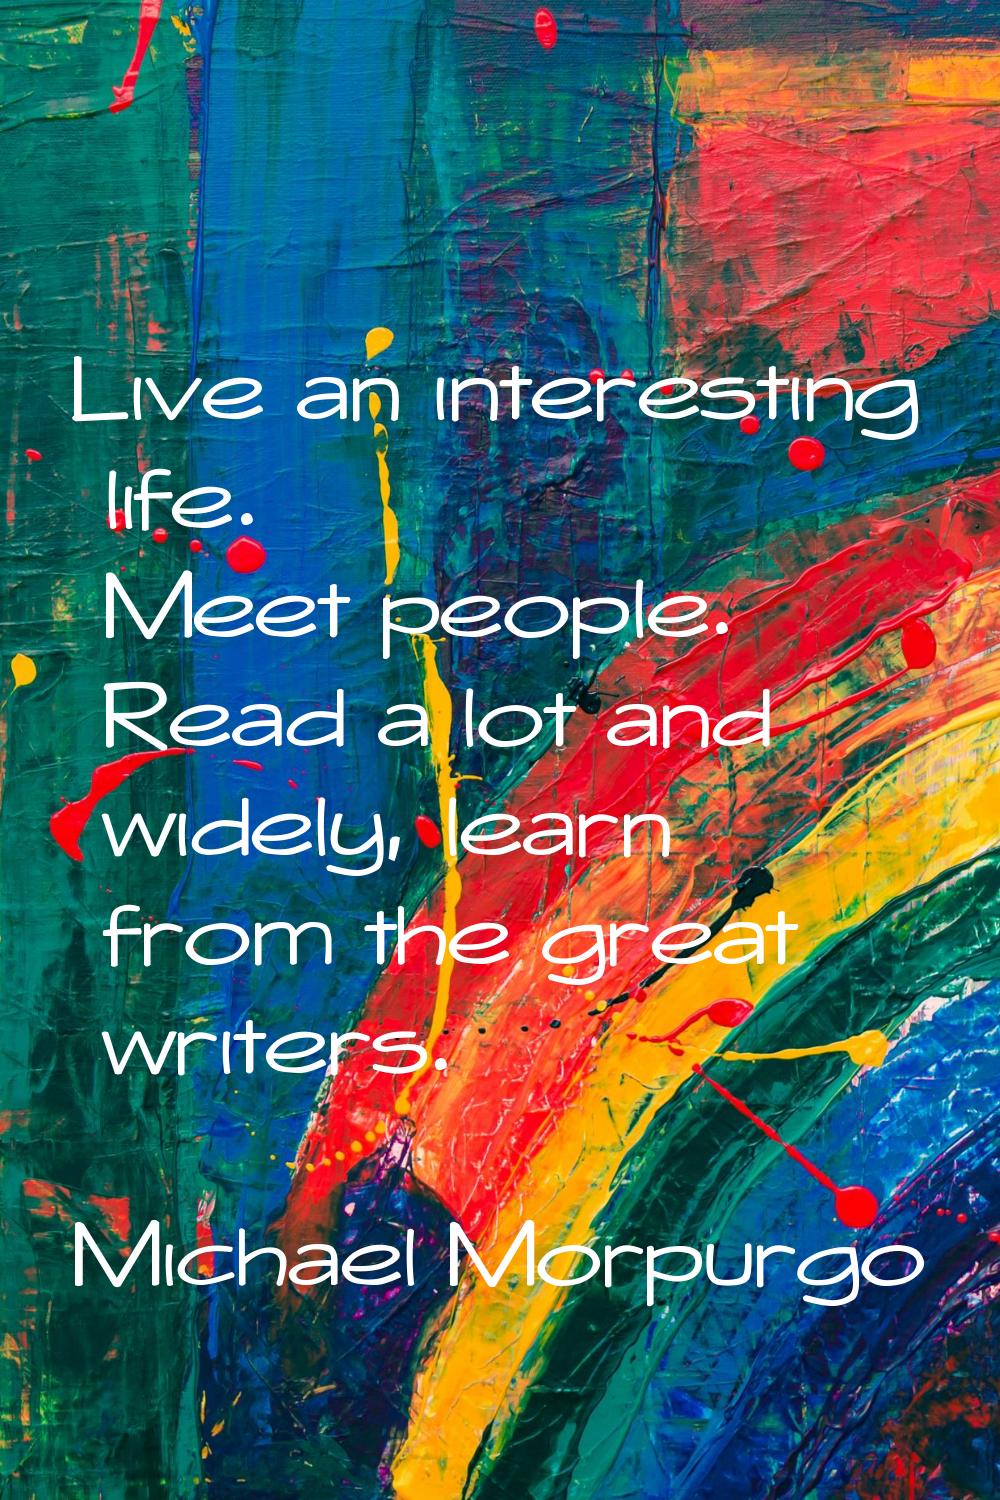 Live an interesting life. Meet people. Read a lot and widely, learn from the great writers.